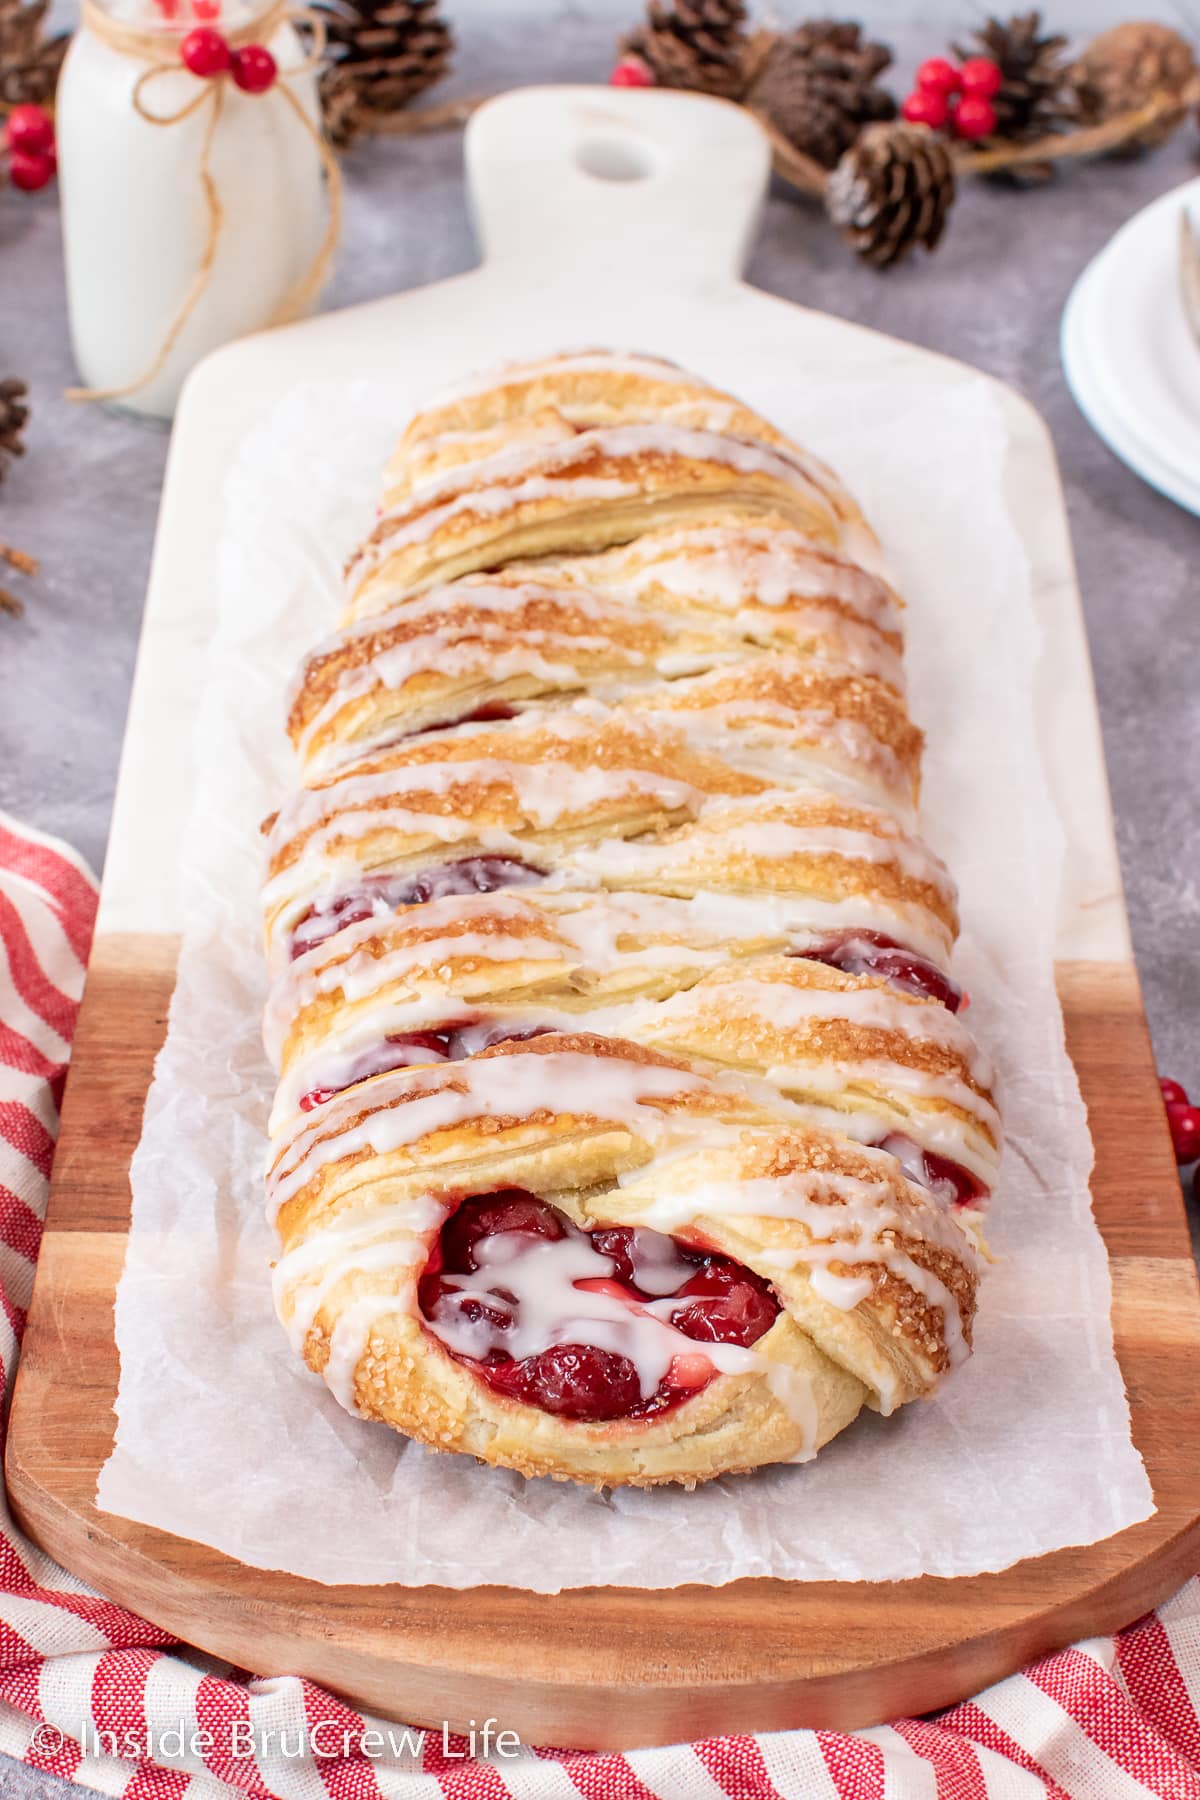 A full braided danish filled with cherry filling on a wooden board.